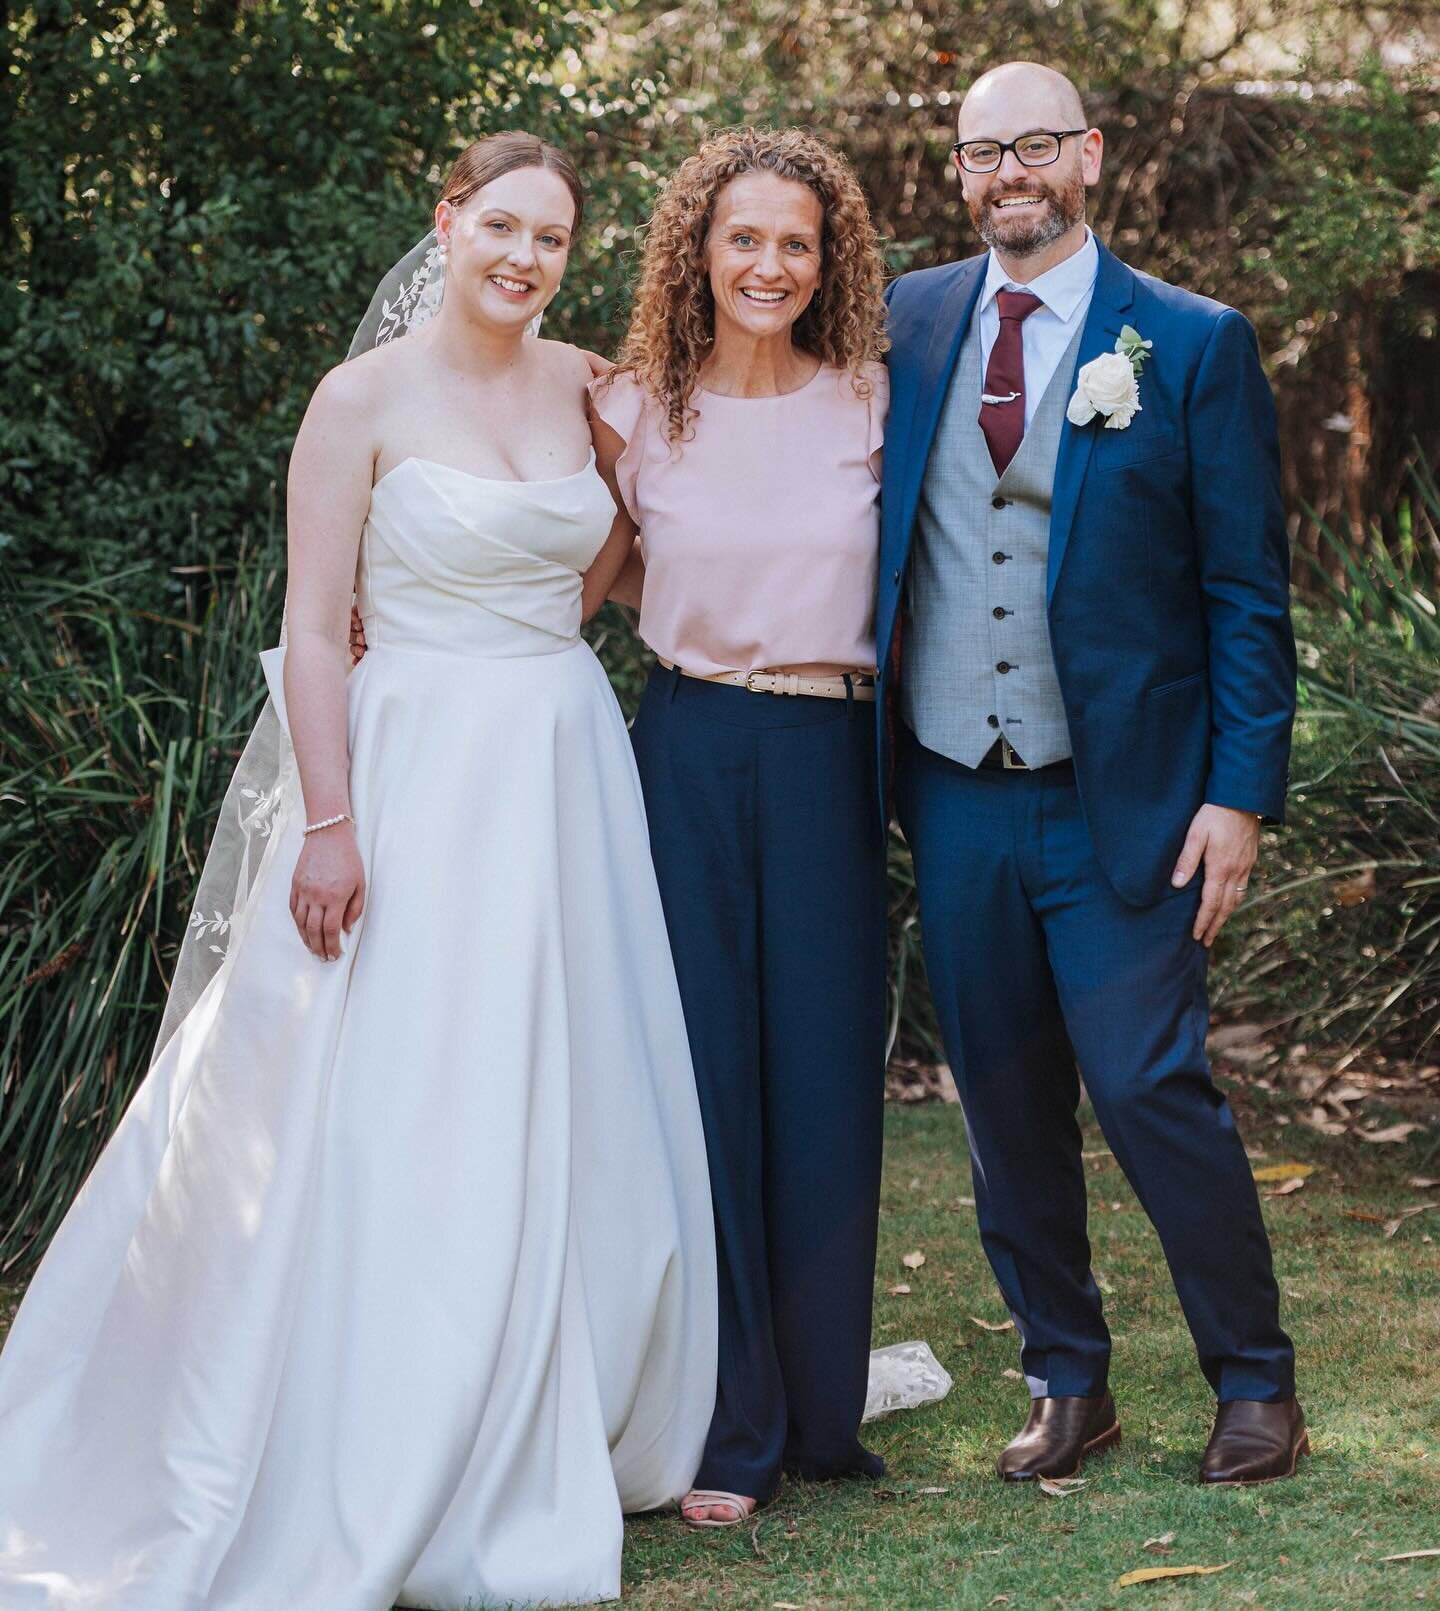 ⭐️⭐️⭐️⭐️⭐️

Michelle was amazing! We could not dream of a better celebrant for our ceremony. She was funny and serious at the same time, and that was perfect as we had a mix of generations at our wedding.
Michelle also guided us through the process. 